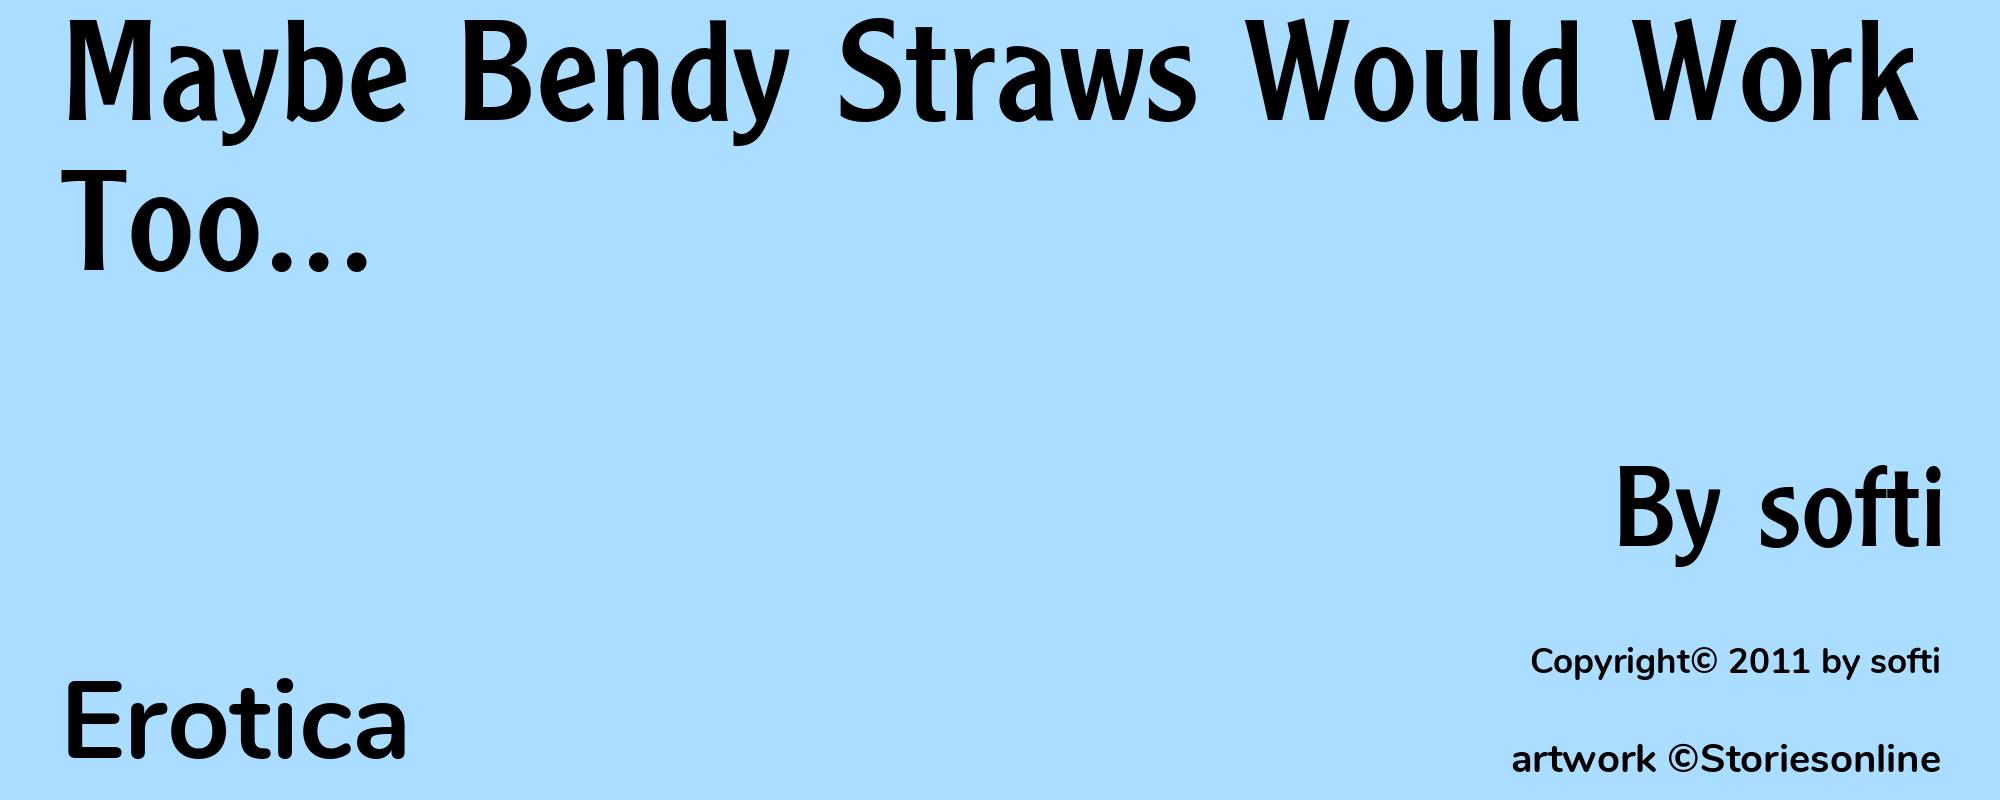 Maybe Bendy Straws Would Work Too... - Cover